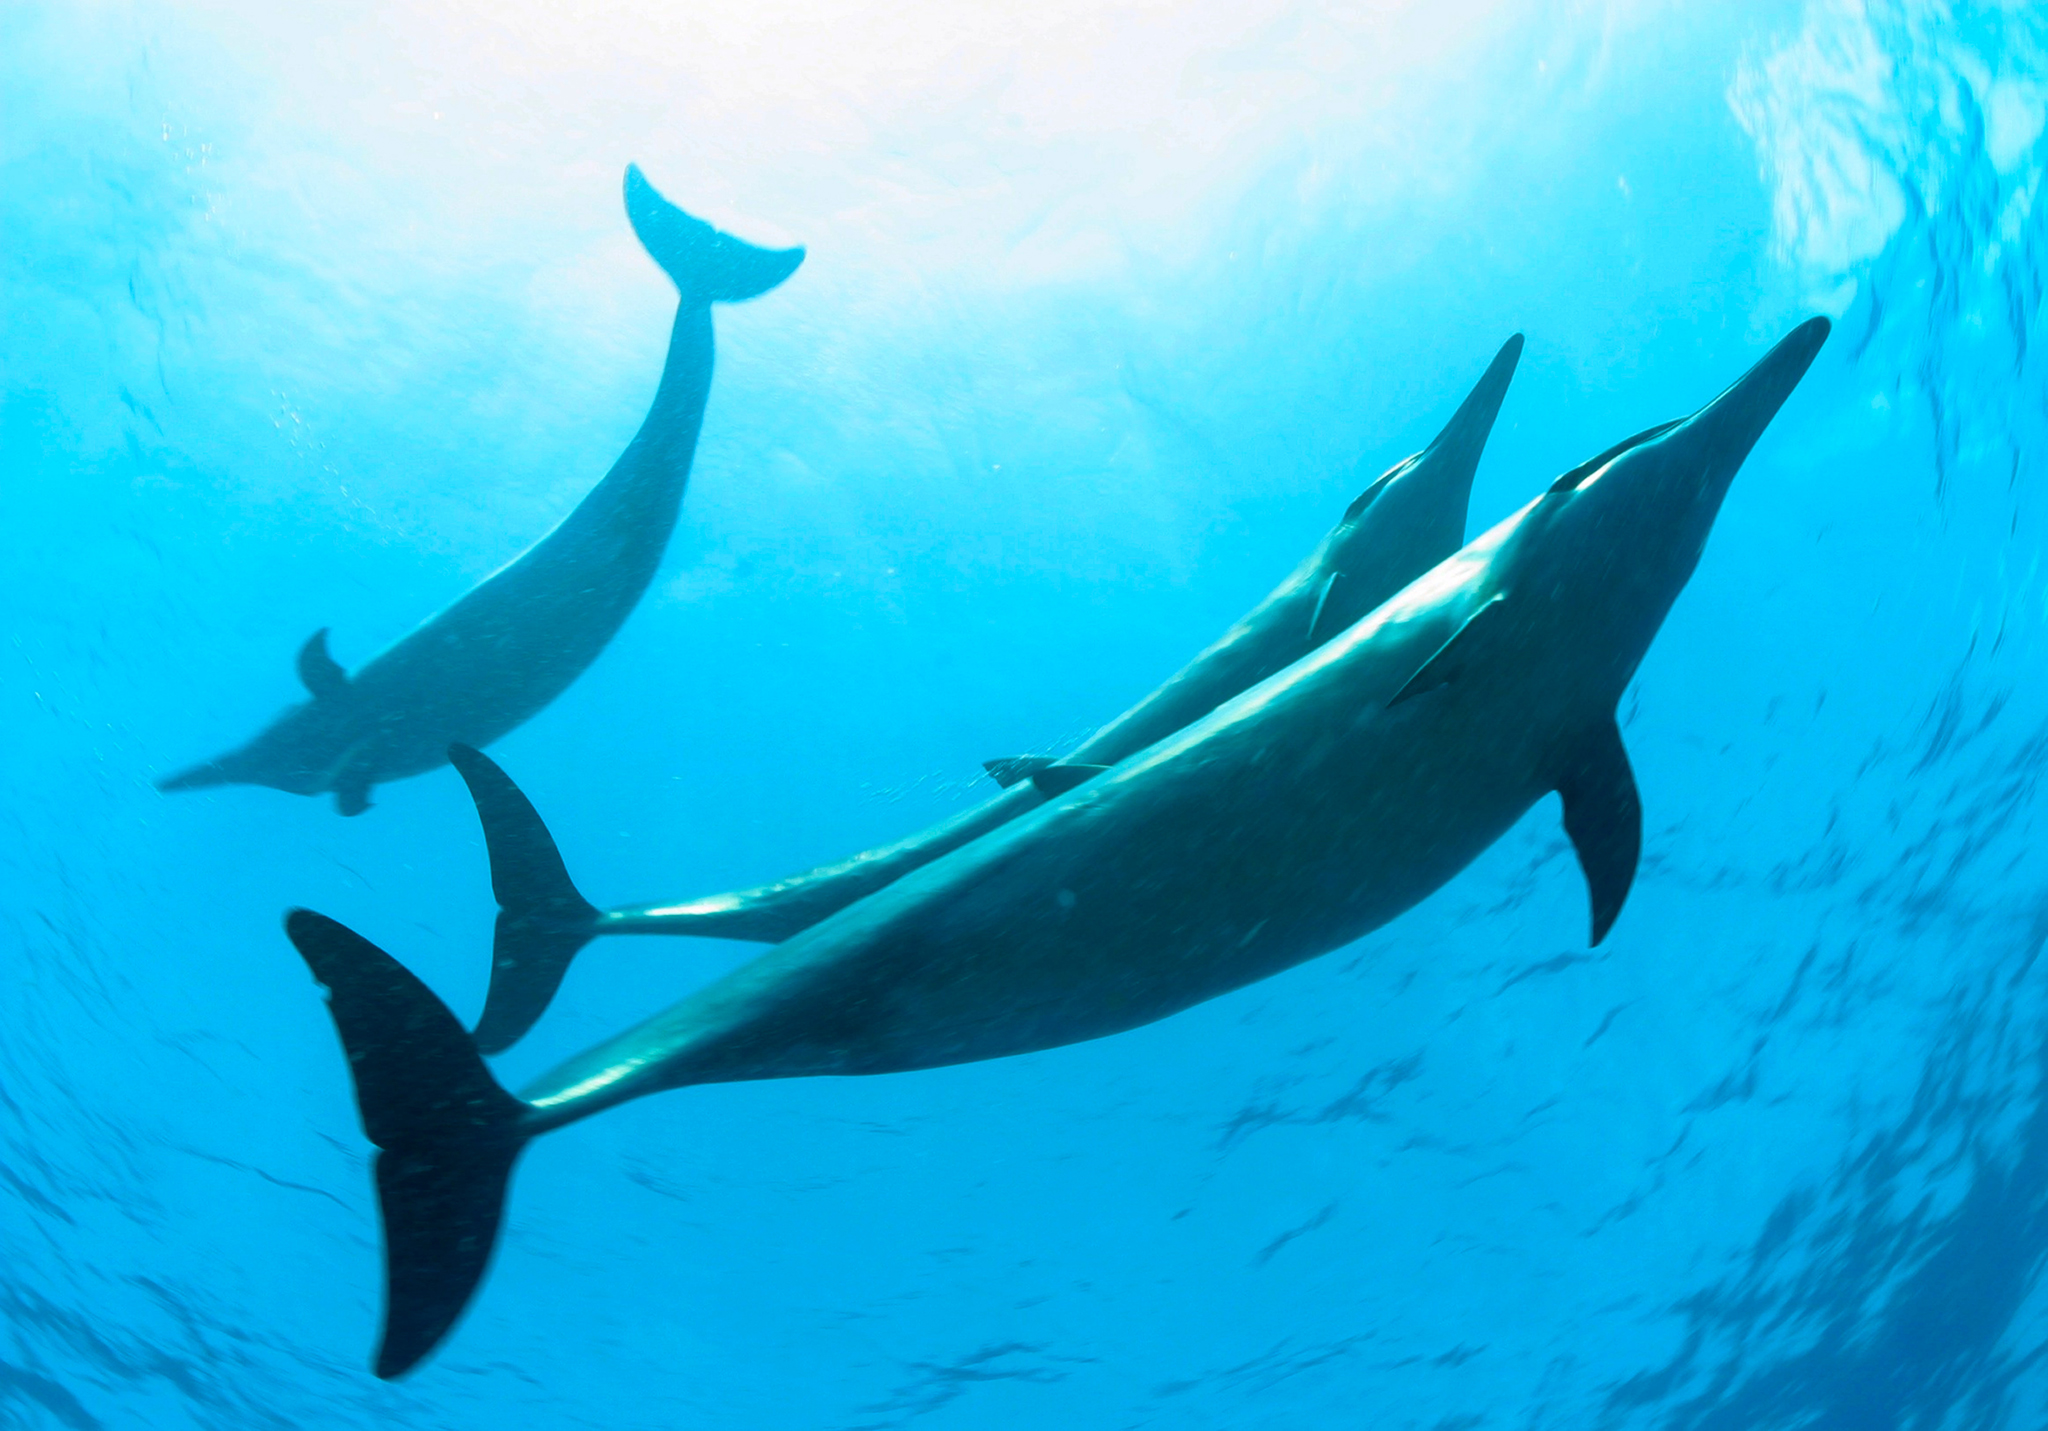 Spinner Dolphins are pictured in this recent undated handout photograph in the Northwestern Hawaii Islands. US President George W. Bush on 15 June 2006 designated the Northwestern Hawaii Islands, spanning 1,400 miles of the Pacific Ocean, as a national monument giving it one of the highest levels of protection. Only those with permits for very specific activities will now have access to the region  permits can be obtained for: research, education, conservation and management, native Hawaiian practices, recreation activities and non-extractive special ocean uses.   AFP PHOTO/NOAA/James WATT / AFP PHOTO / NOAA / James Watt